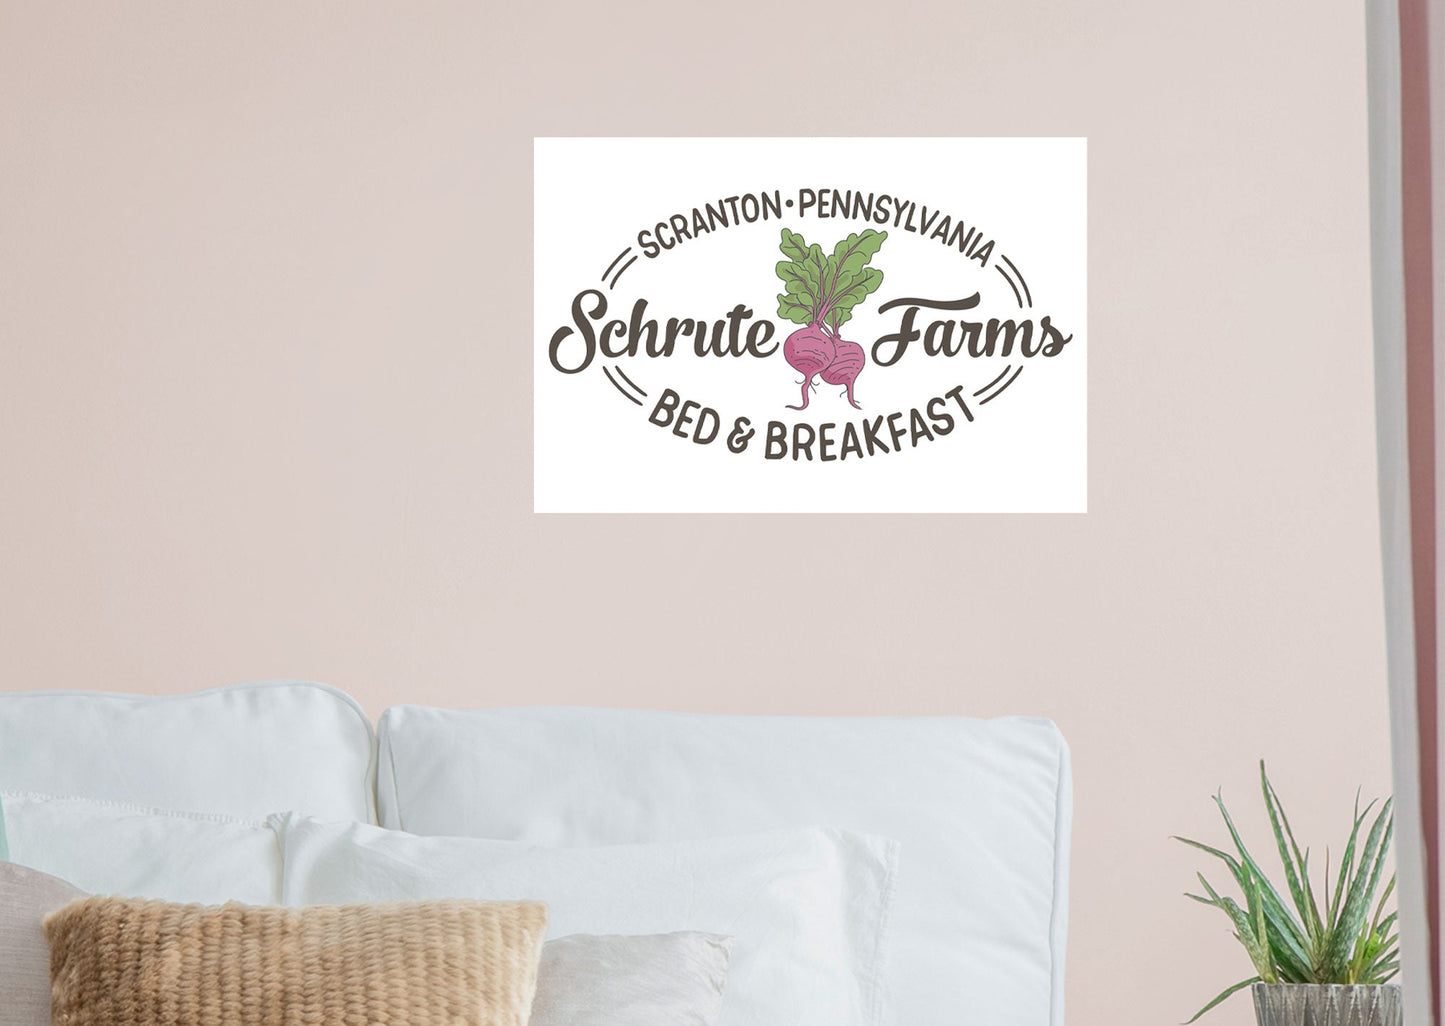 The Office: Schrute Farms Bnb Mural        - Officially Licensed NBC Universal Removable Wall   Adhesive Decal